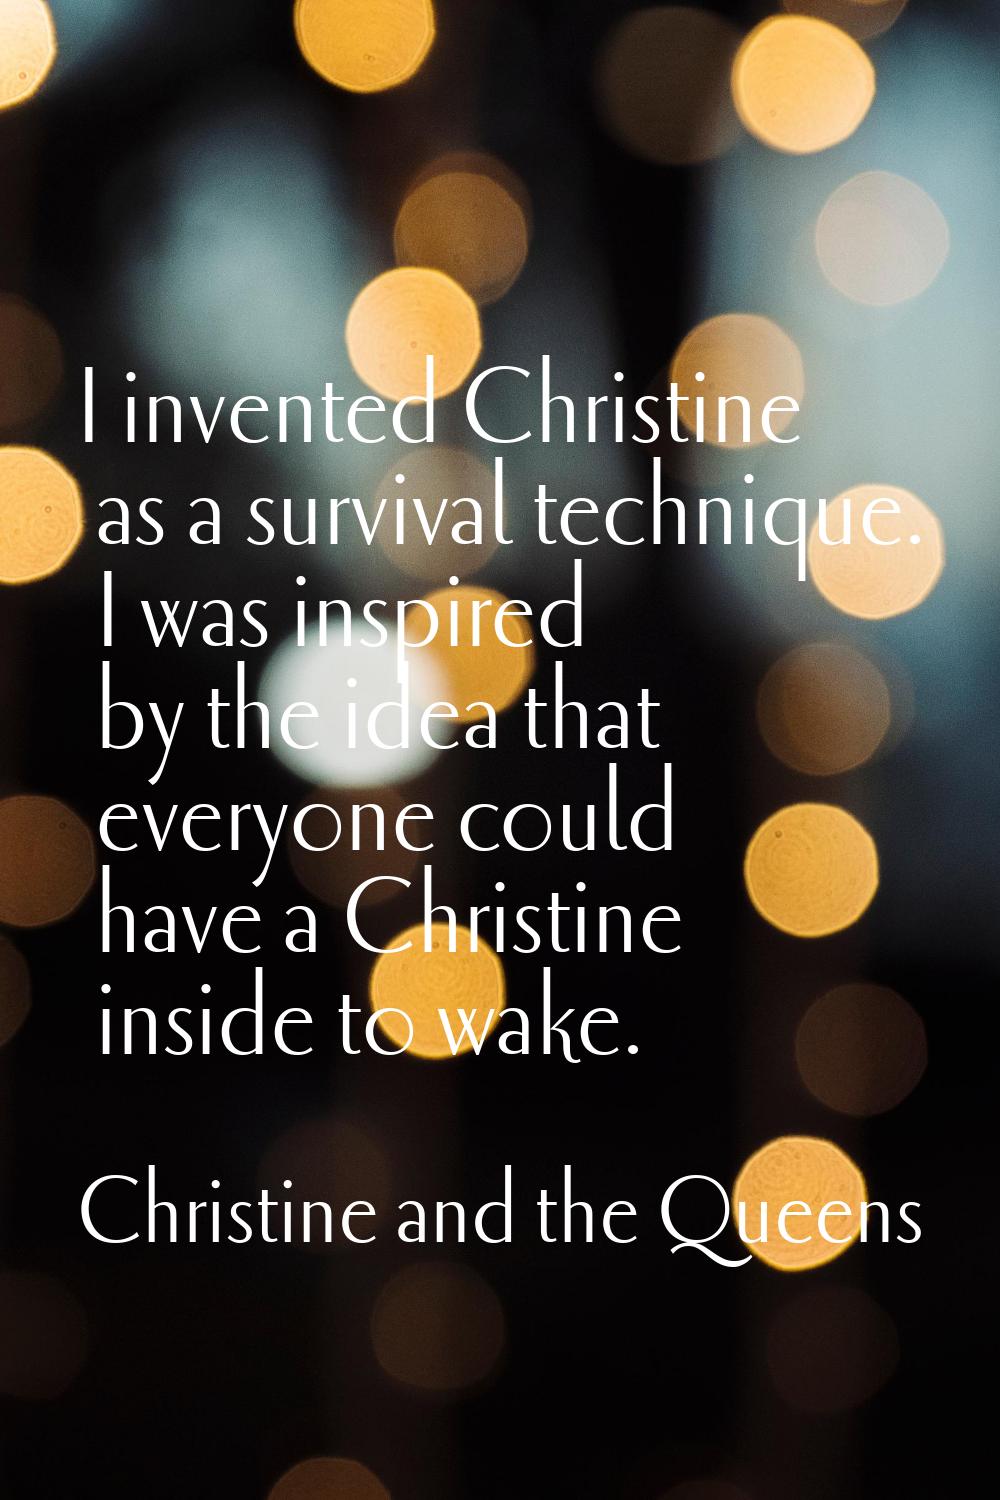 I invented Christine as a survival technique. I was inspired by the idea that everyone could have a